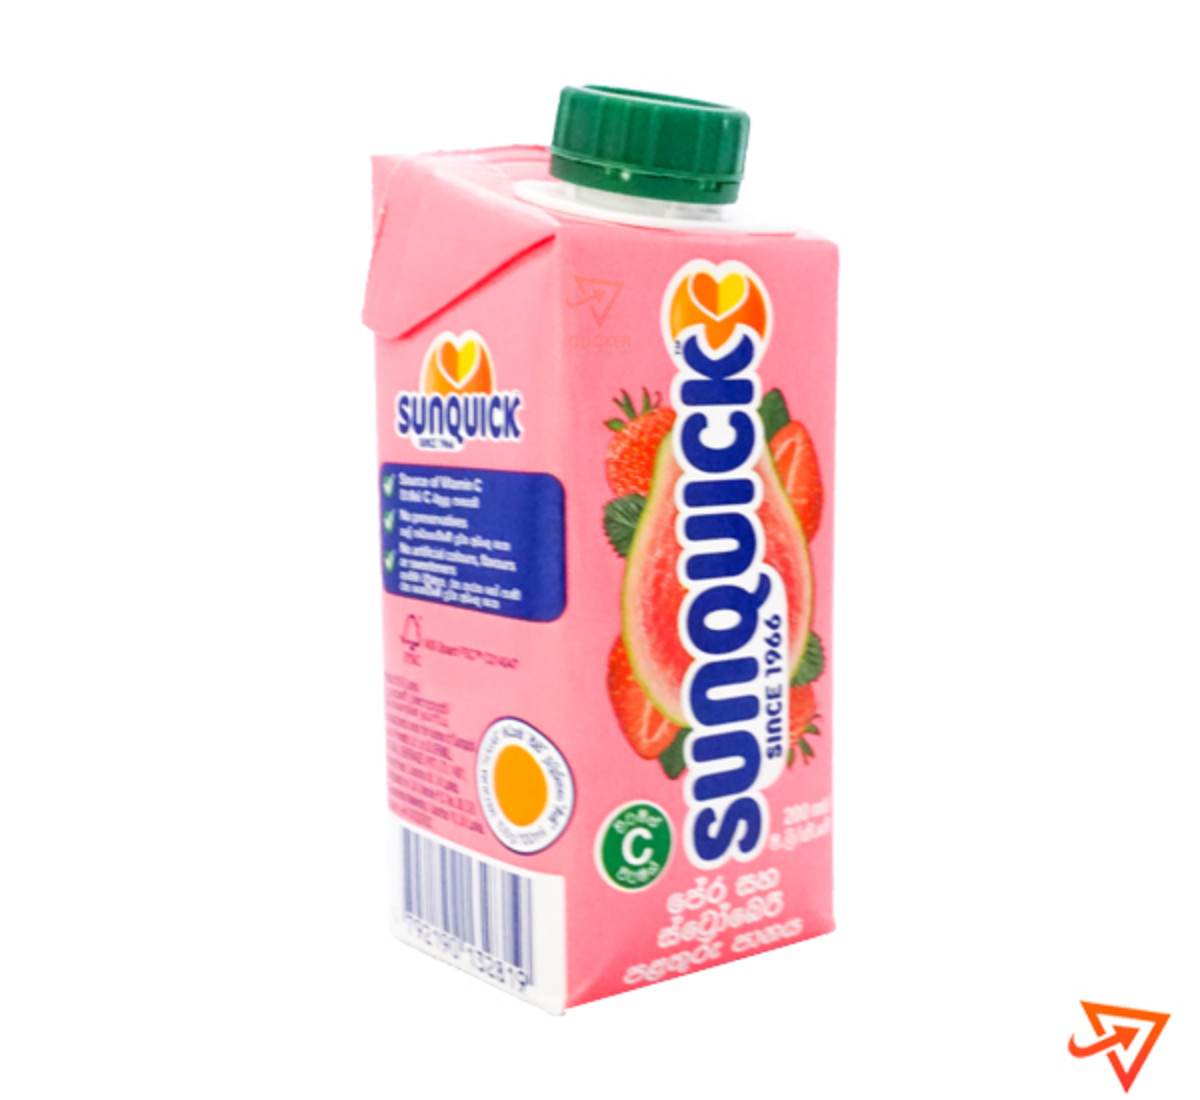 Clicker product 200ml SUNQUICK pink guava and strawberry Drink 1187